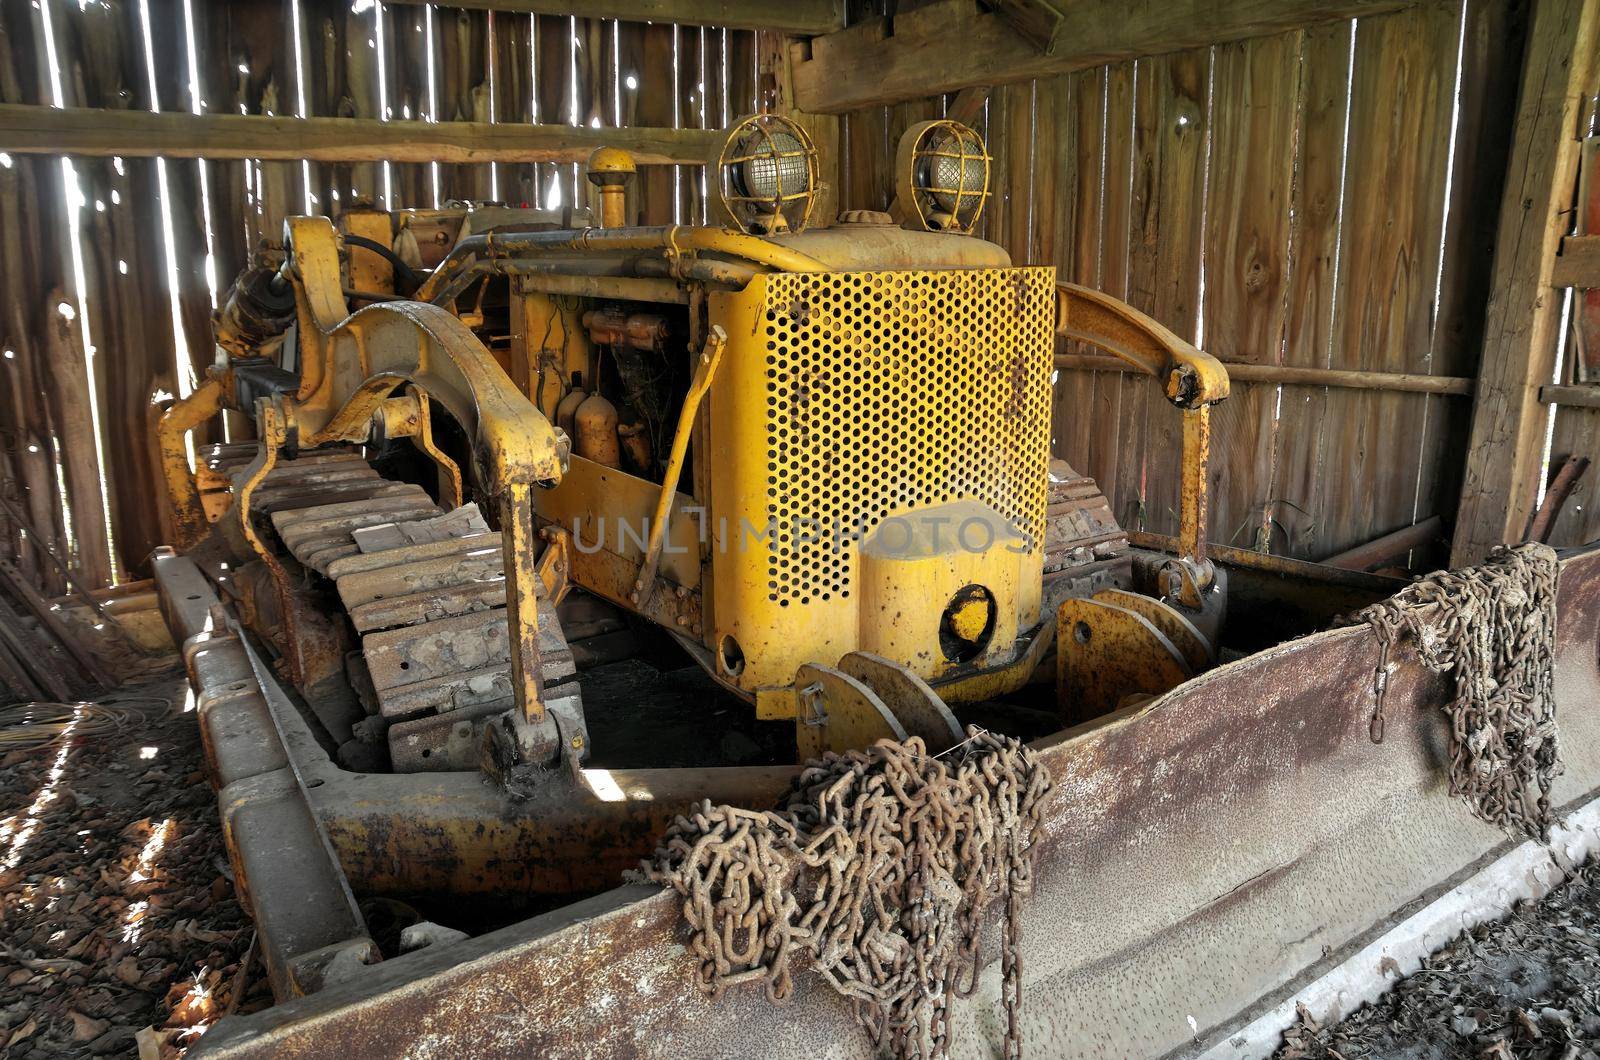 Yellow Antique Vintage Bulldozer Stored in an Old Rustic Barn. High quality photo